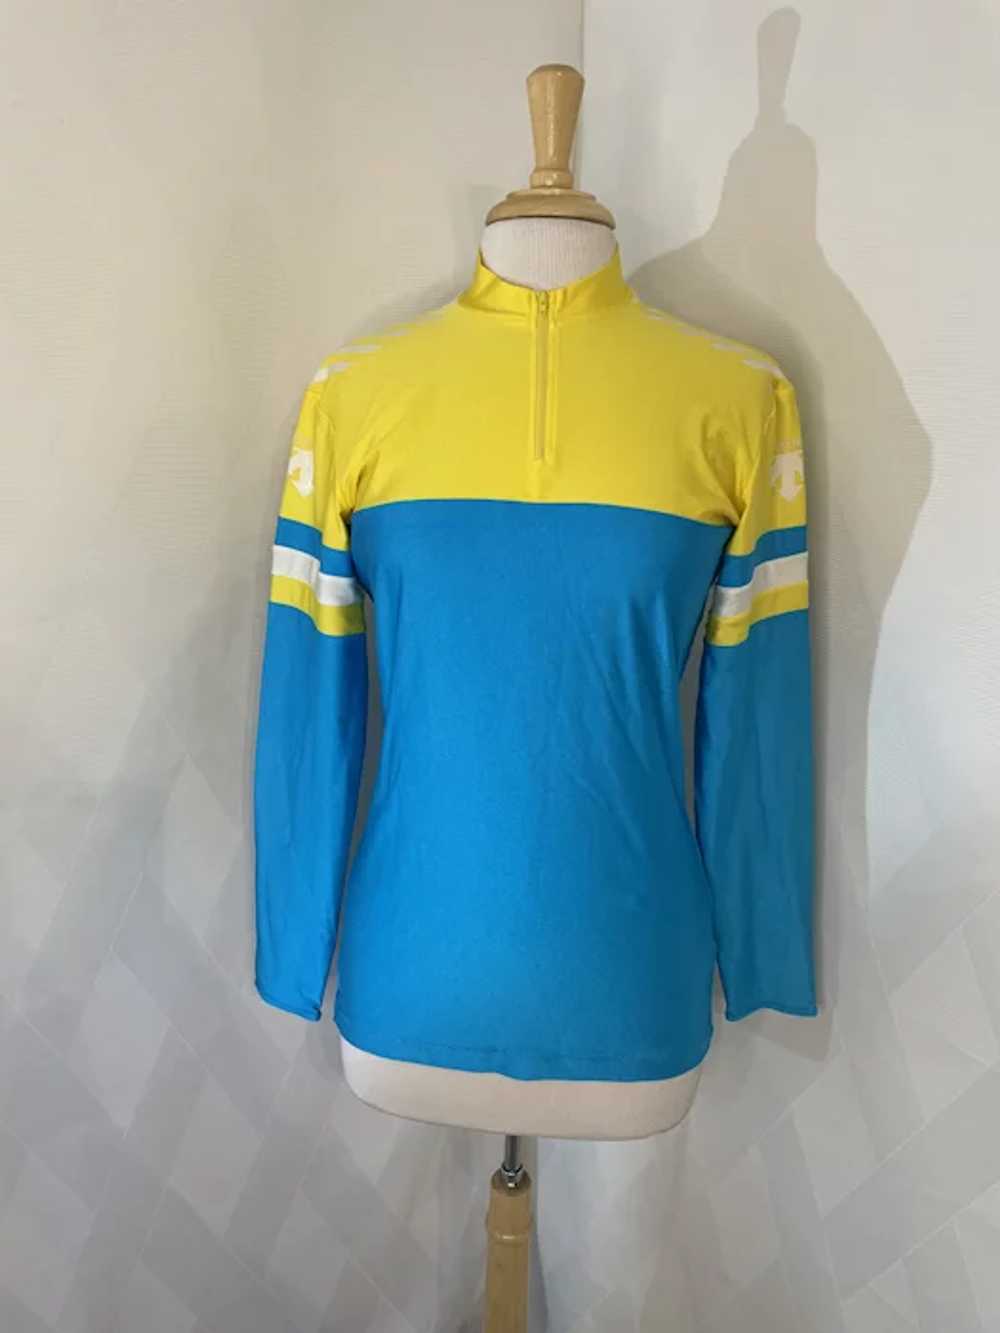 Vintage 1990s Descente Yellow and Blue Long Sleev… - image 3